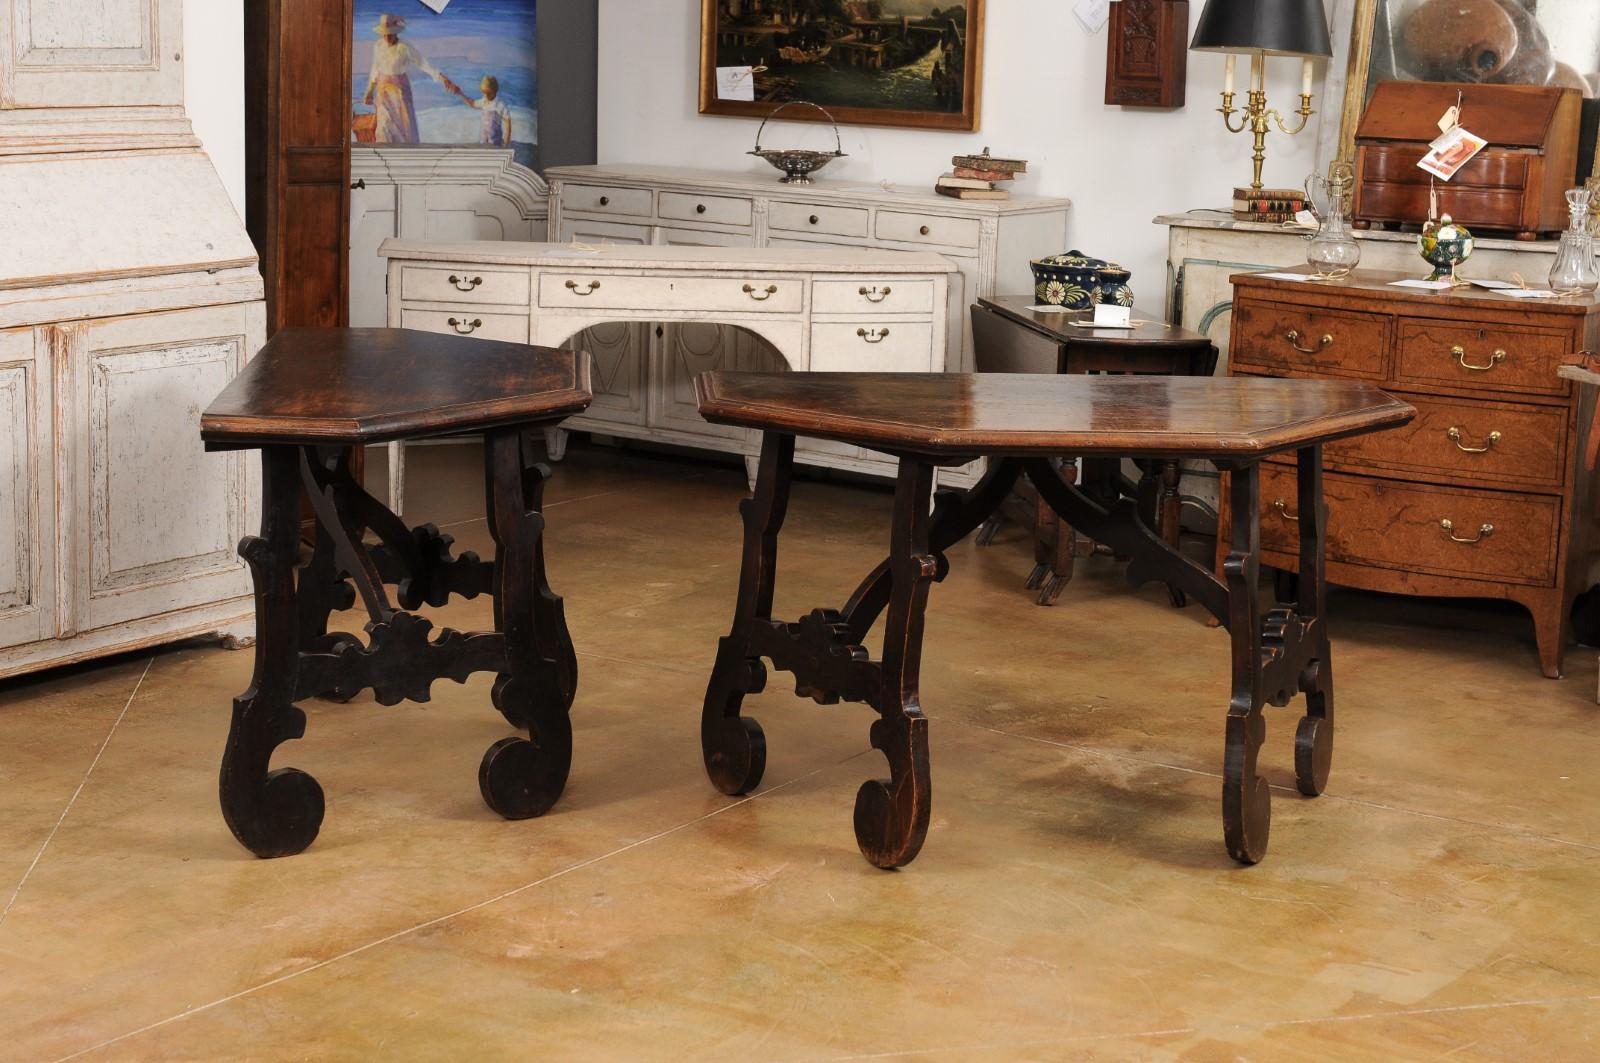 17th Century Italian Baroque Walnut Fratino Consoles with Carved Bases, a Pair For Sale 3